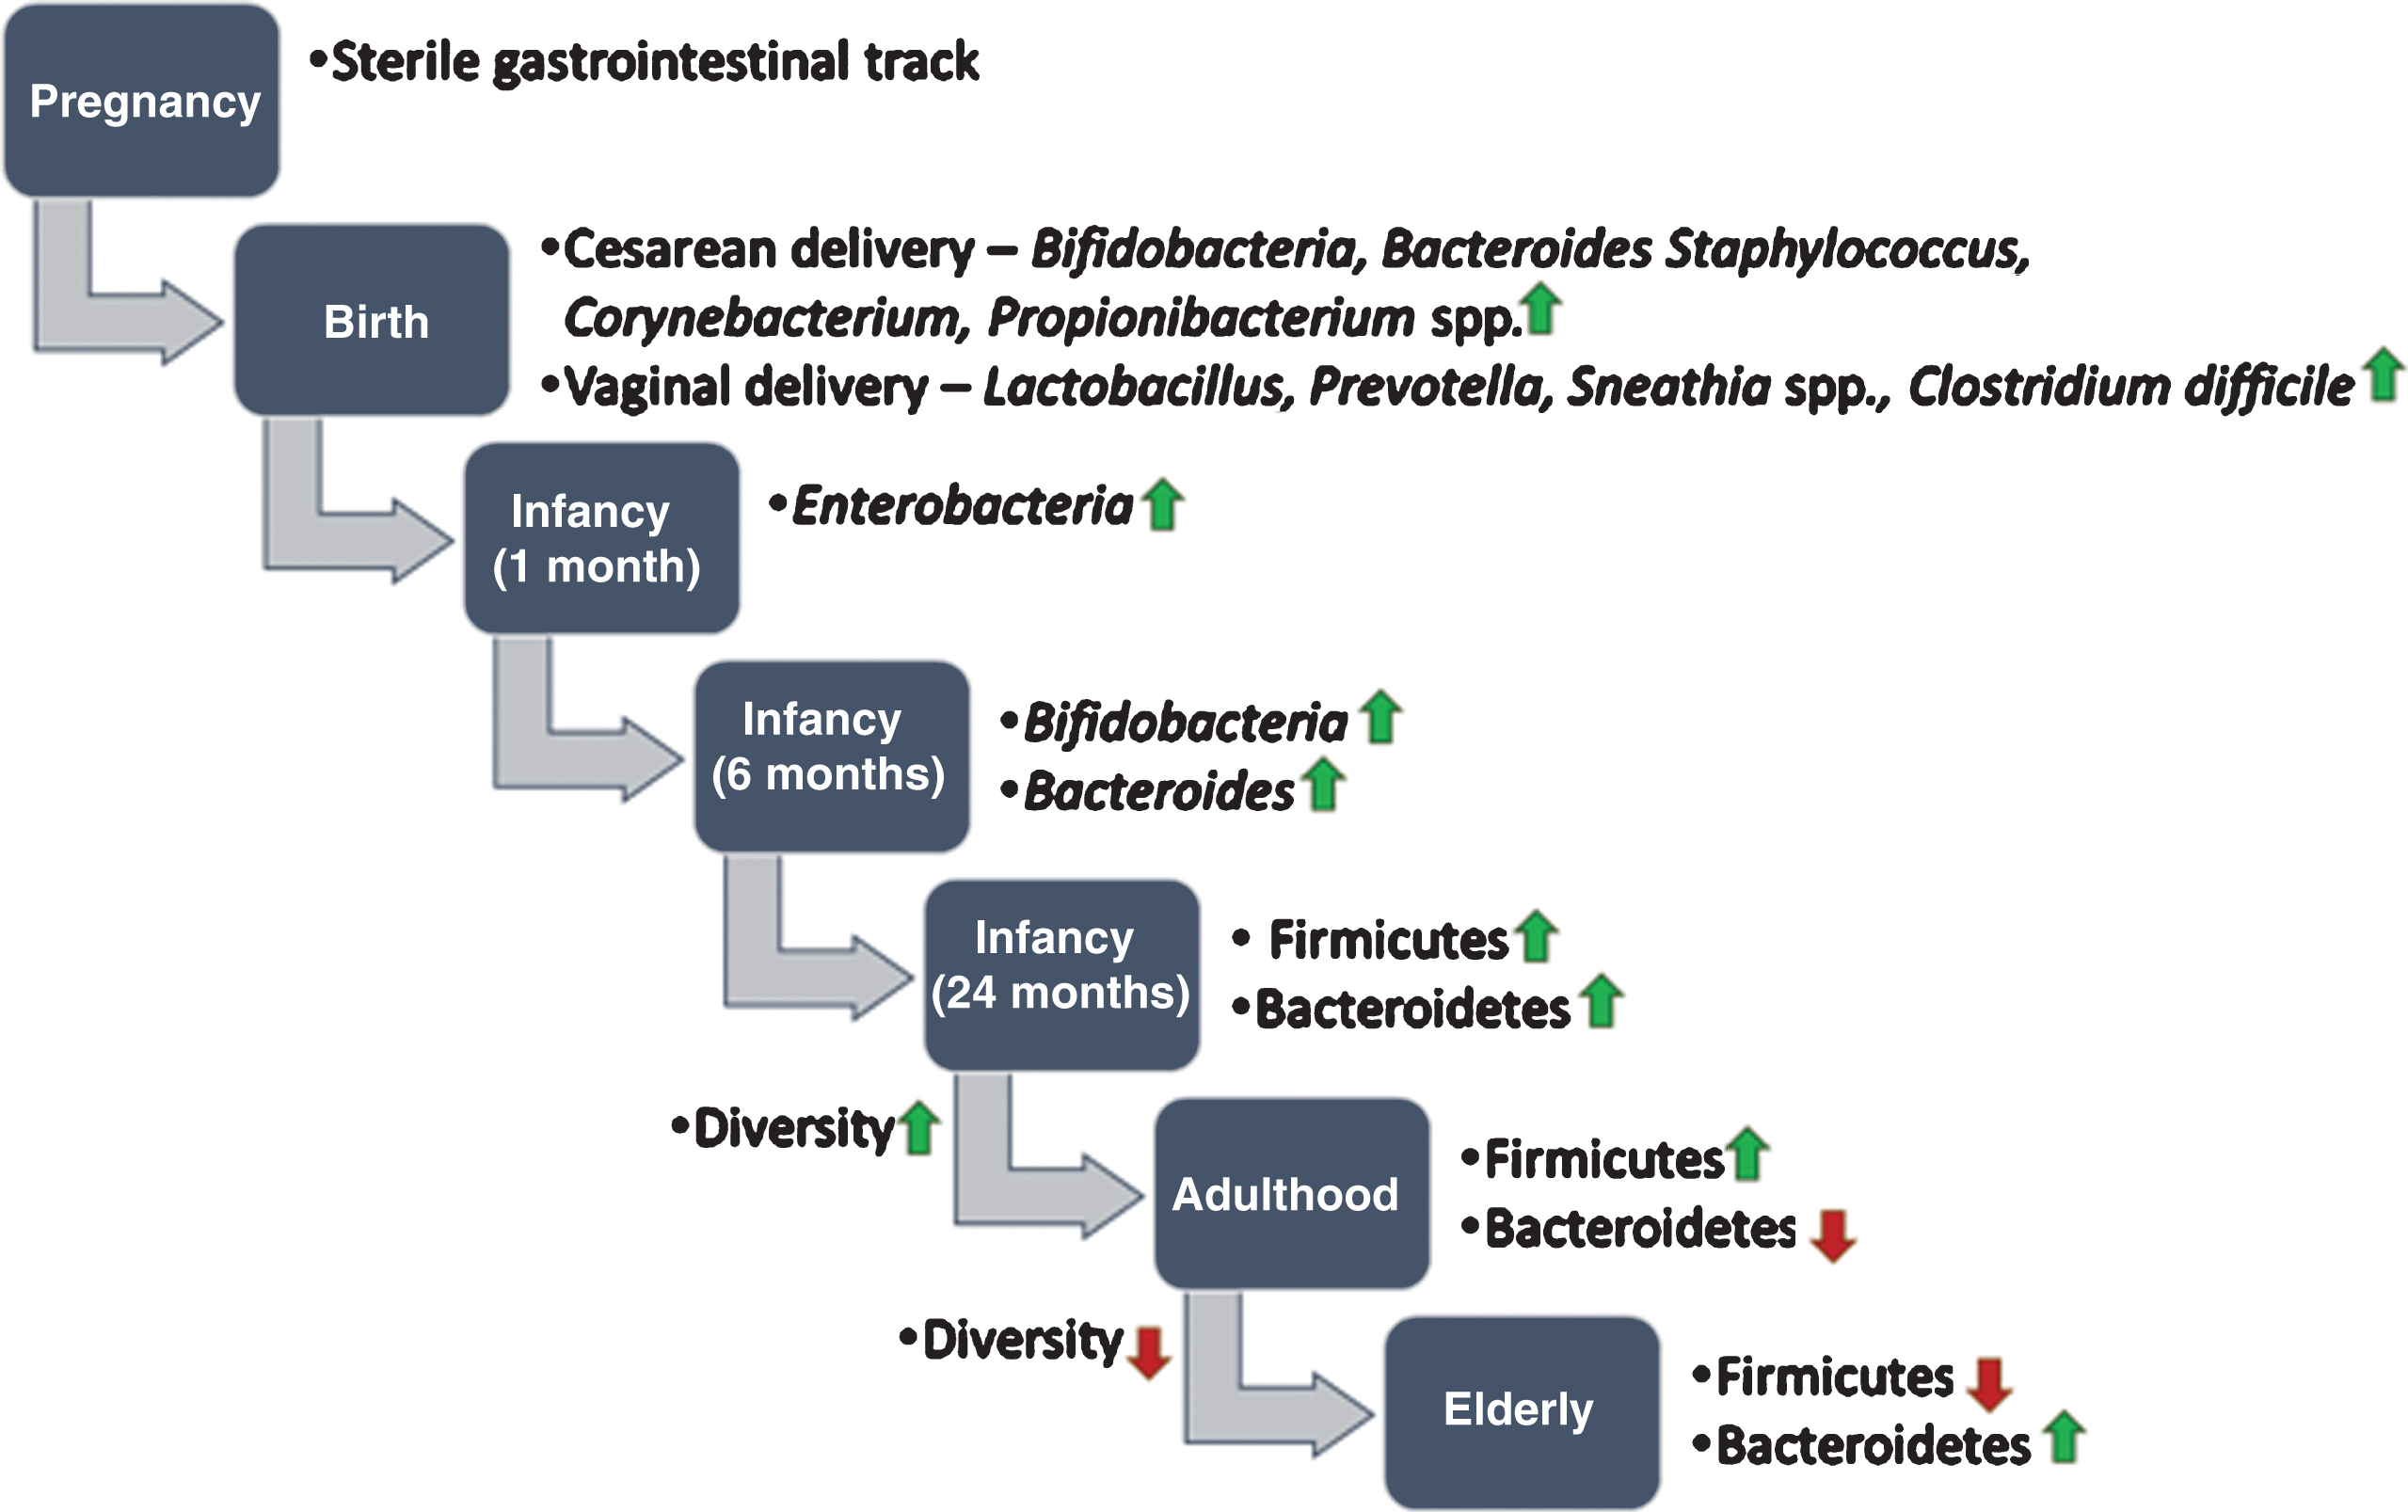 Development of human gut microbiota from prenatal to elderly. It is believed that infants are born with a sterile gastrointestinal track. During birth, the infant gut is exposed to microbes from the mother’s reproductive tract and environment and the gut microbiota starts colonizing. Up to the first two years of life, the composition of the gut microbiota often varies. After two years, when children are started to eat solid food (e.g. fibers and complex carbohydrates), the gut microbiota becomes more diverse and stable. In old age, the gut microbiota alters drastically and shows less diversity compared to younger age.